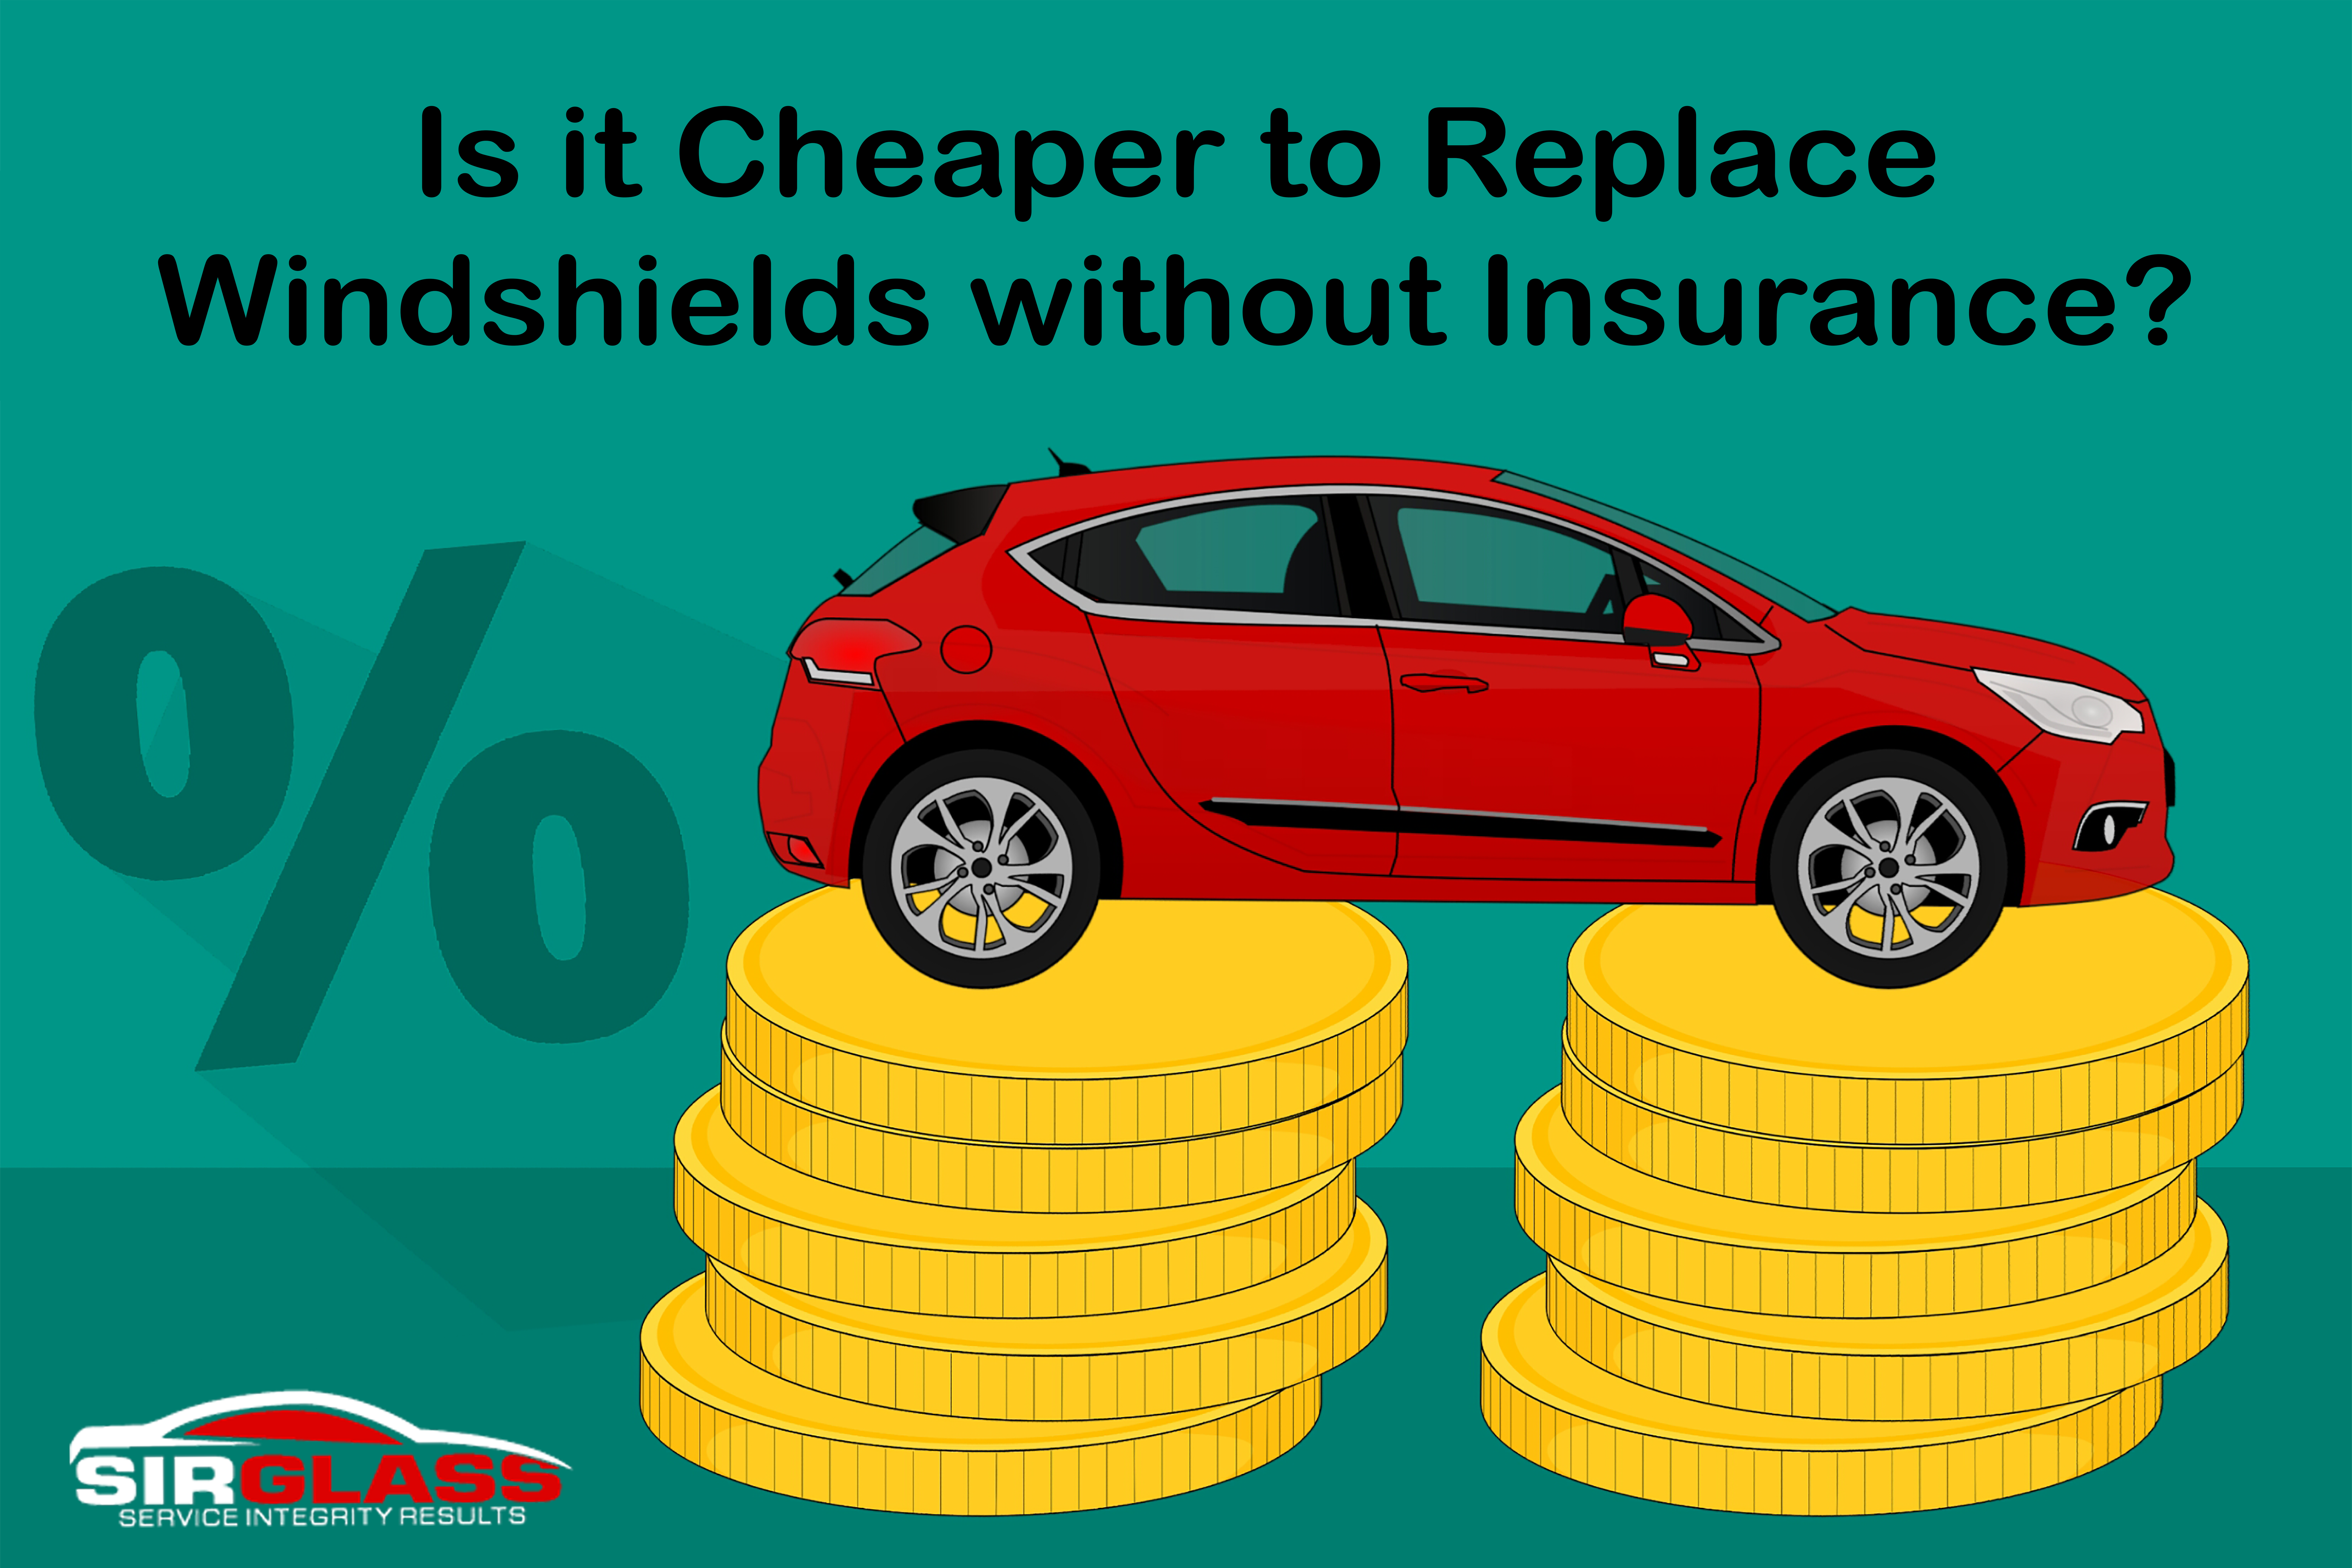 Is it Cheaper to Replace Windshields without Insurance?